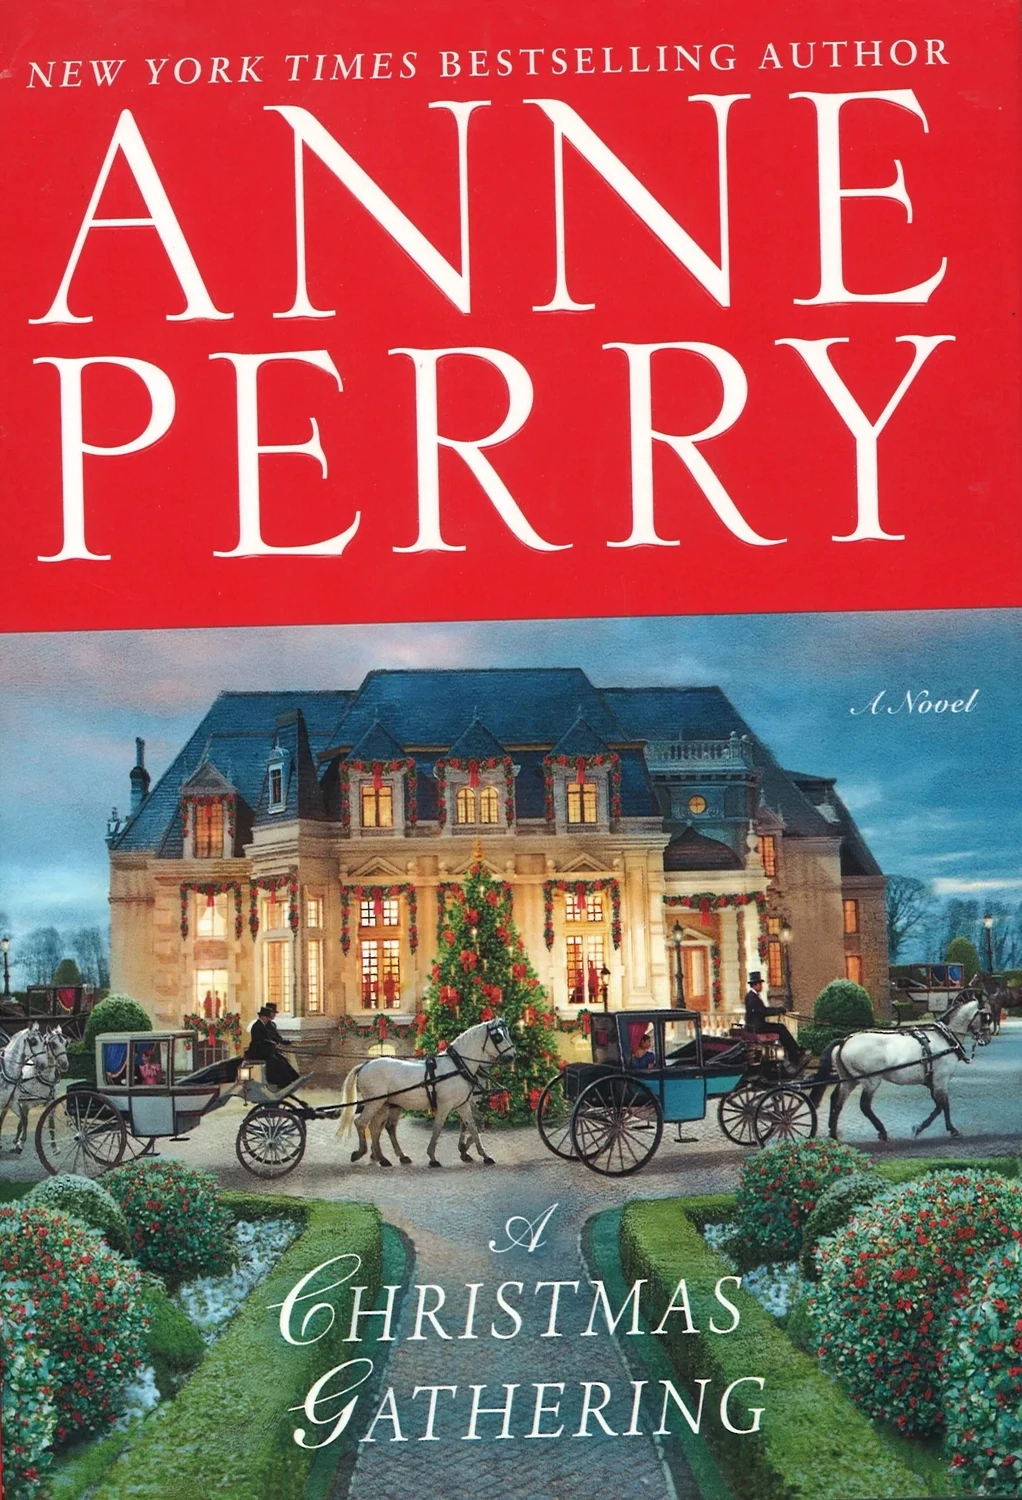 A Christmas Gathering by Anne Perry